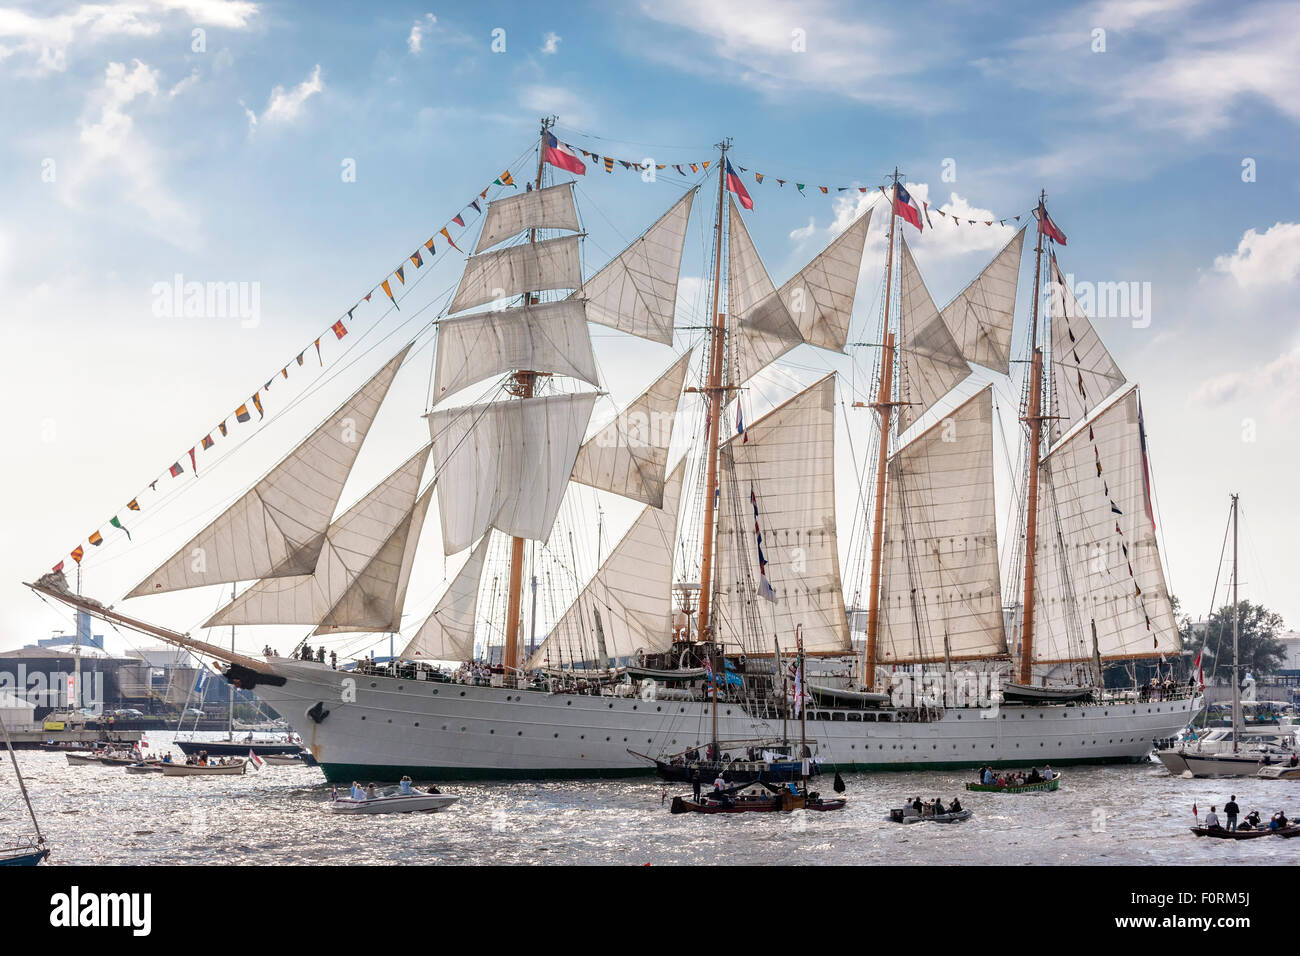 The tall ship Esmeralda from Chile, Amsterdam Sail 2015 Stock Photo